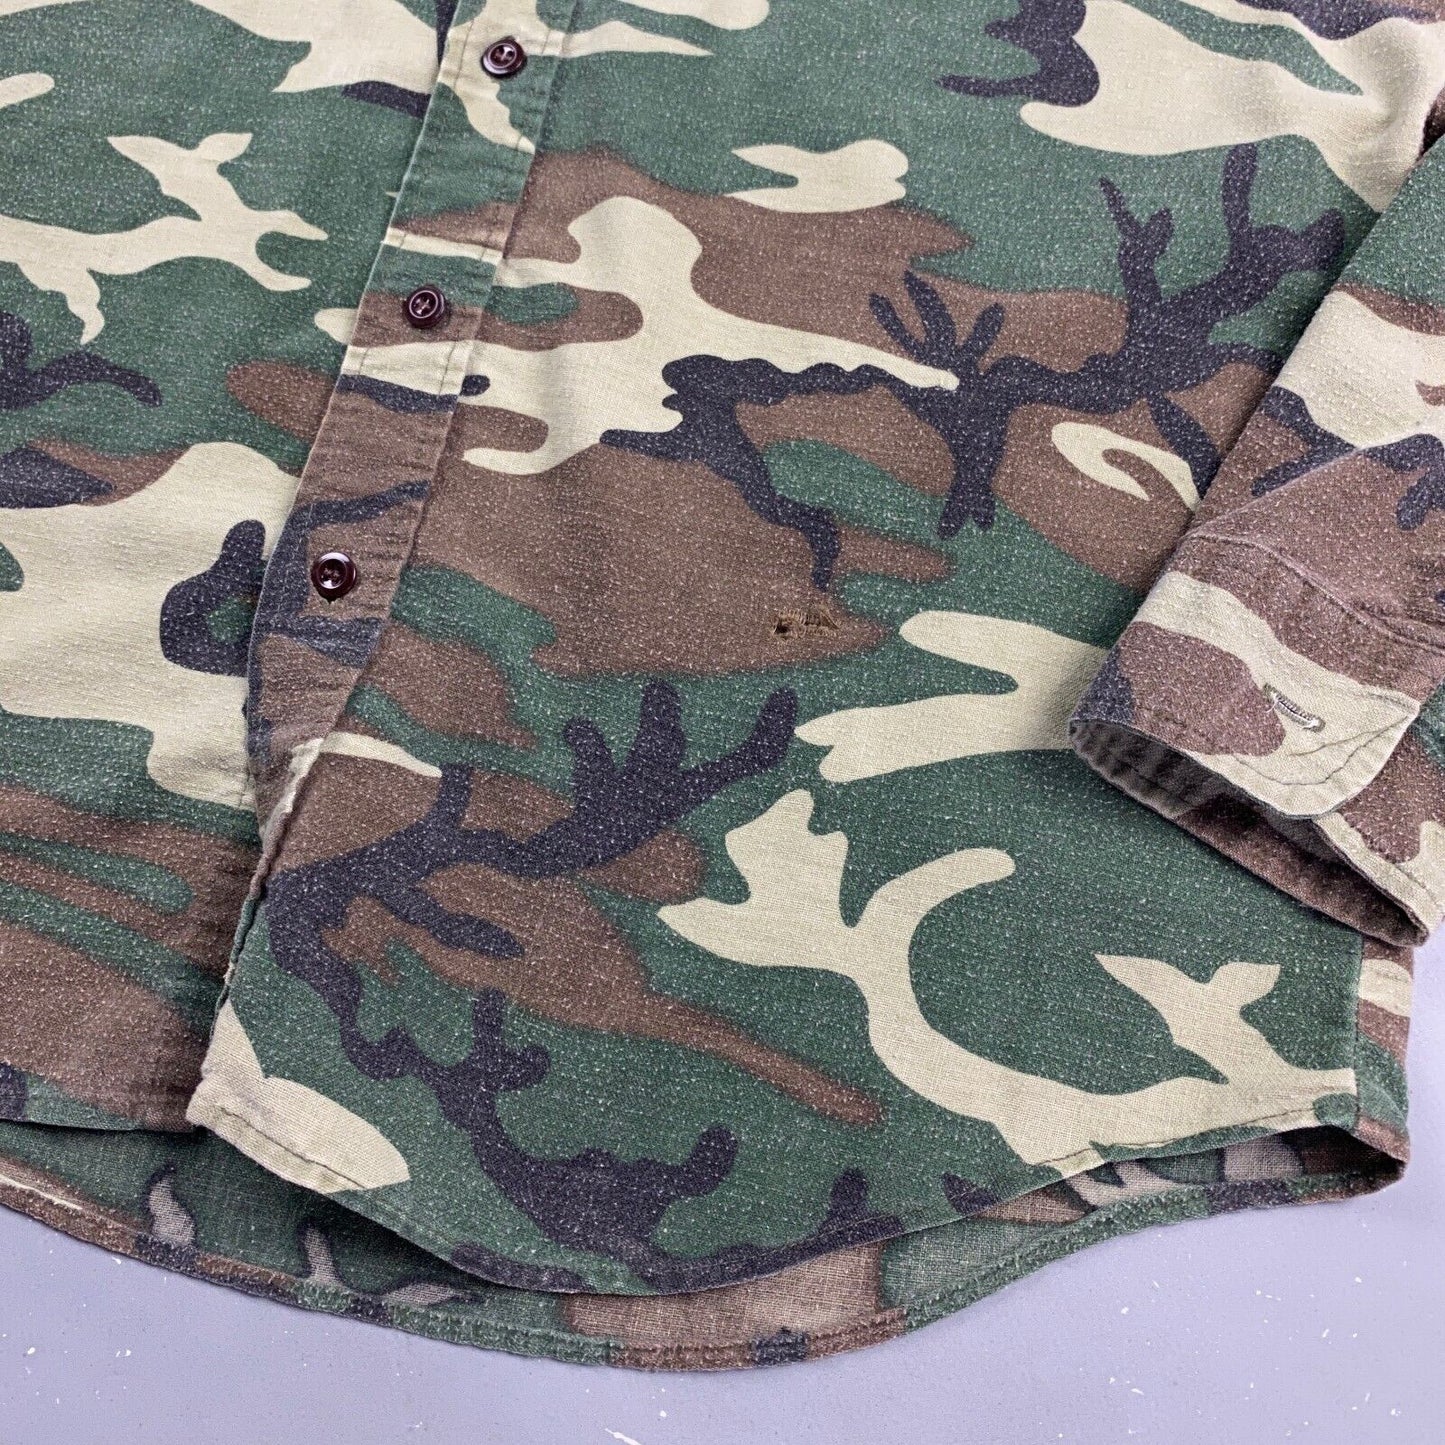 VINTAGE 80s Outdoor Sports Camo Cloth Button Up Shirt sz Large Adult